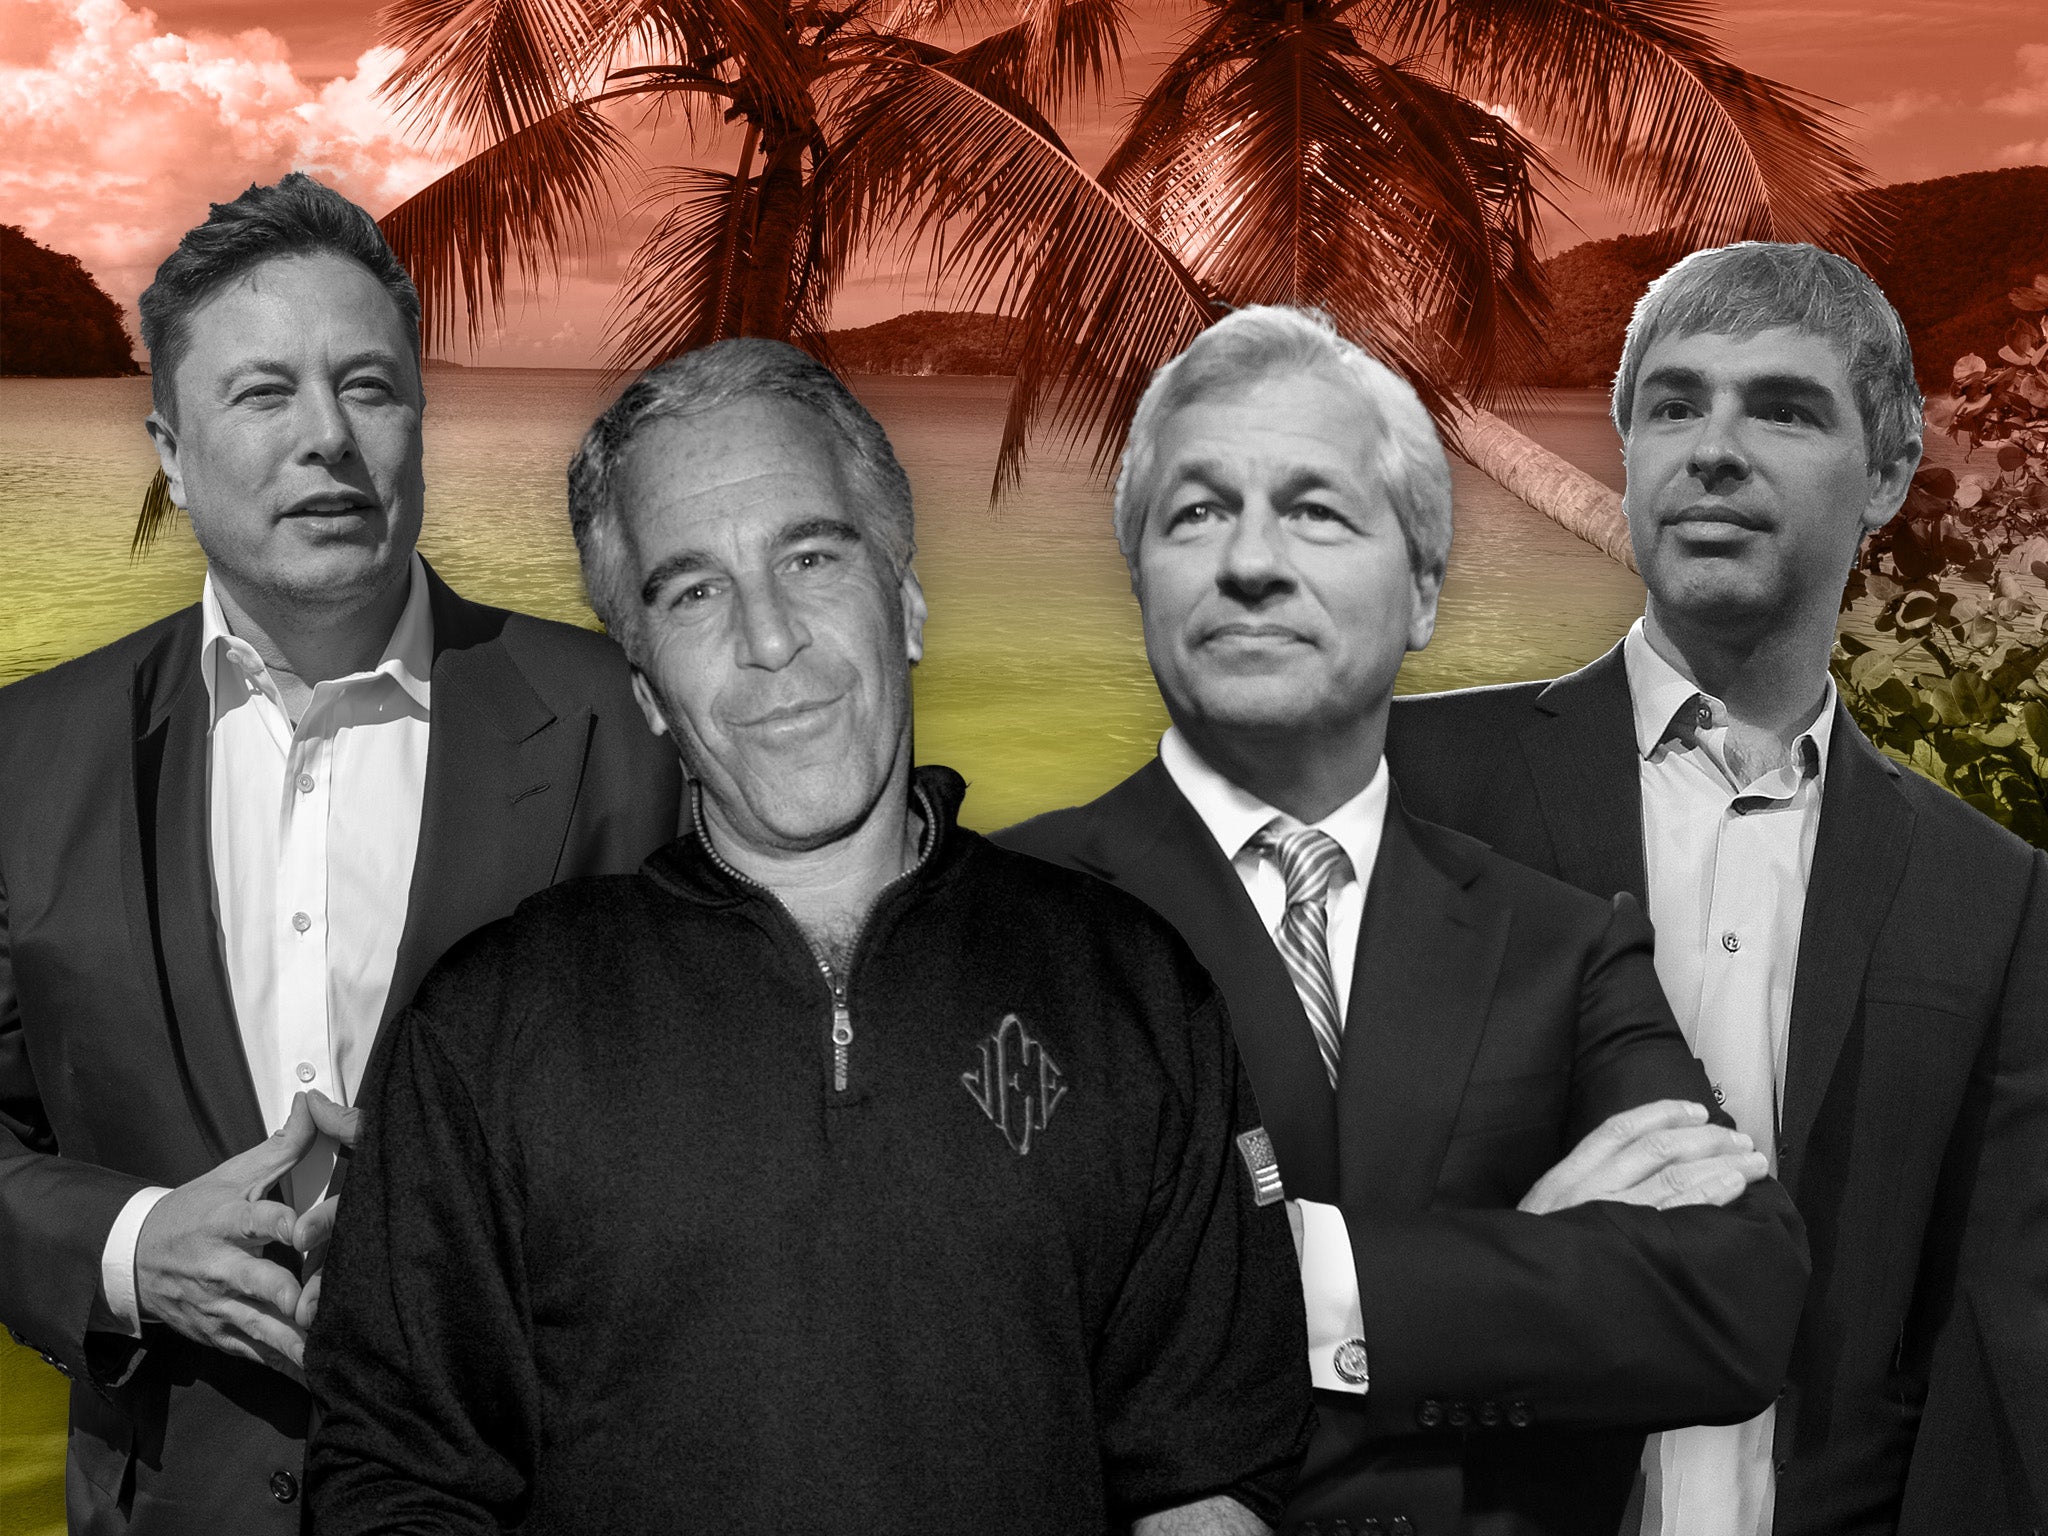 From left Elon Musk, Jeffrey Epstein, Jamie Dimon and Larry Page